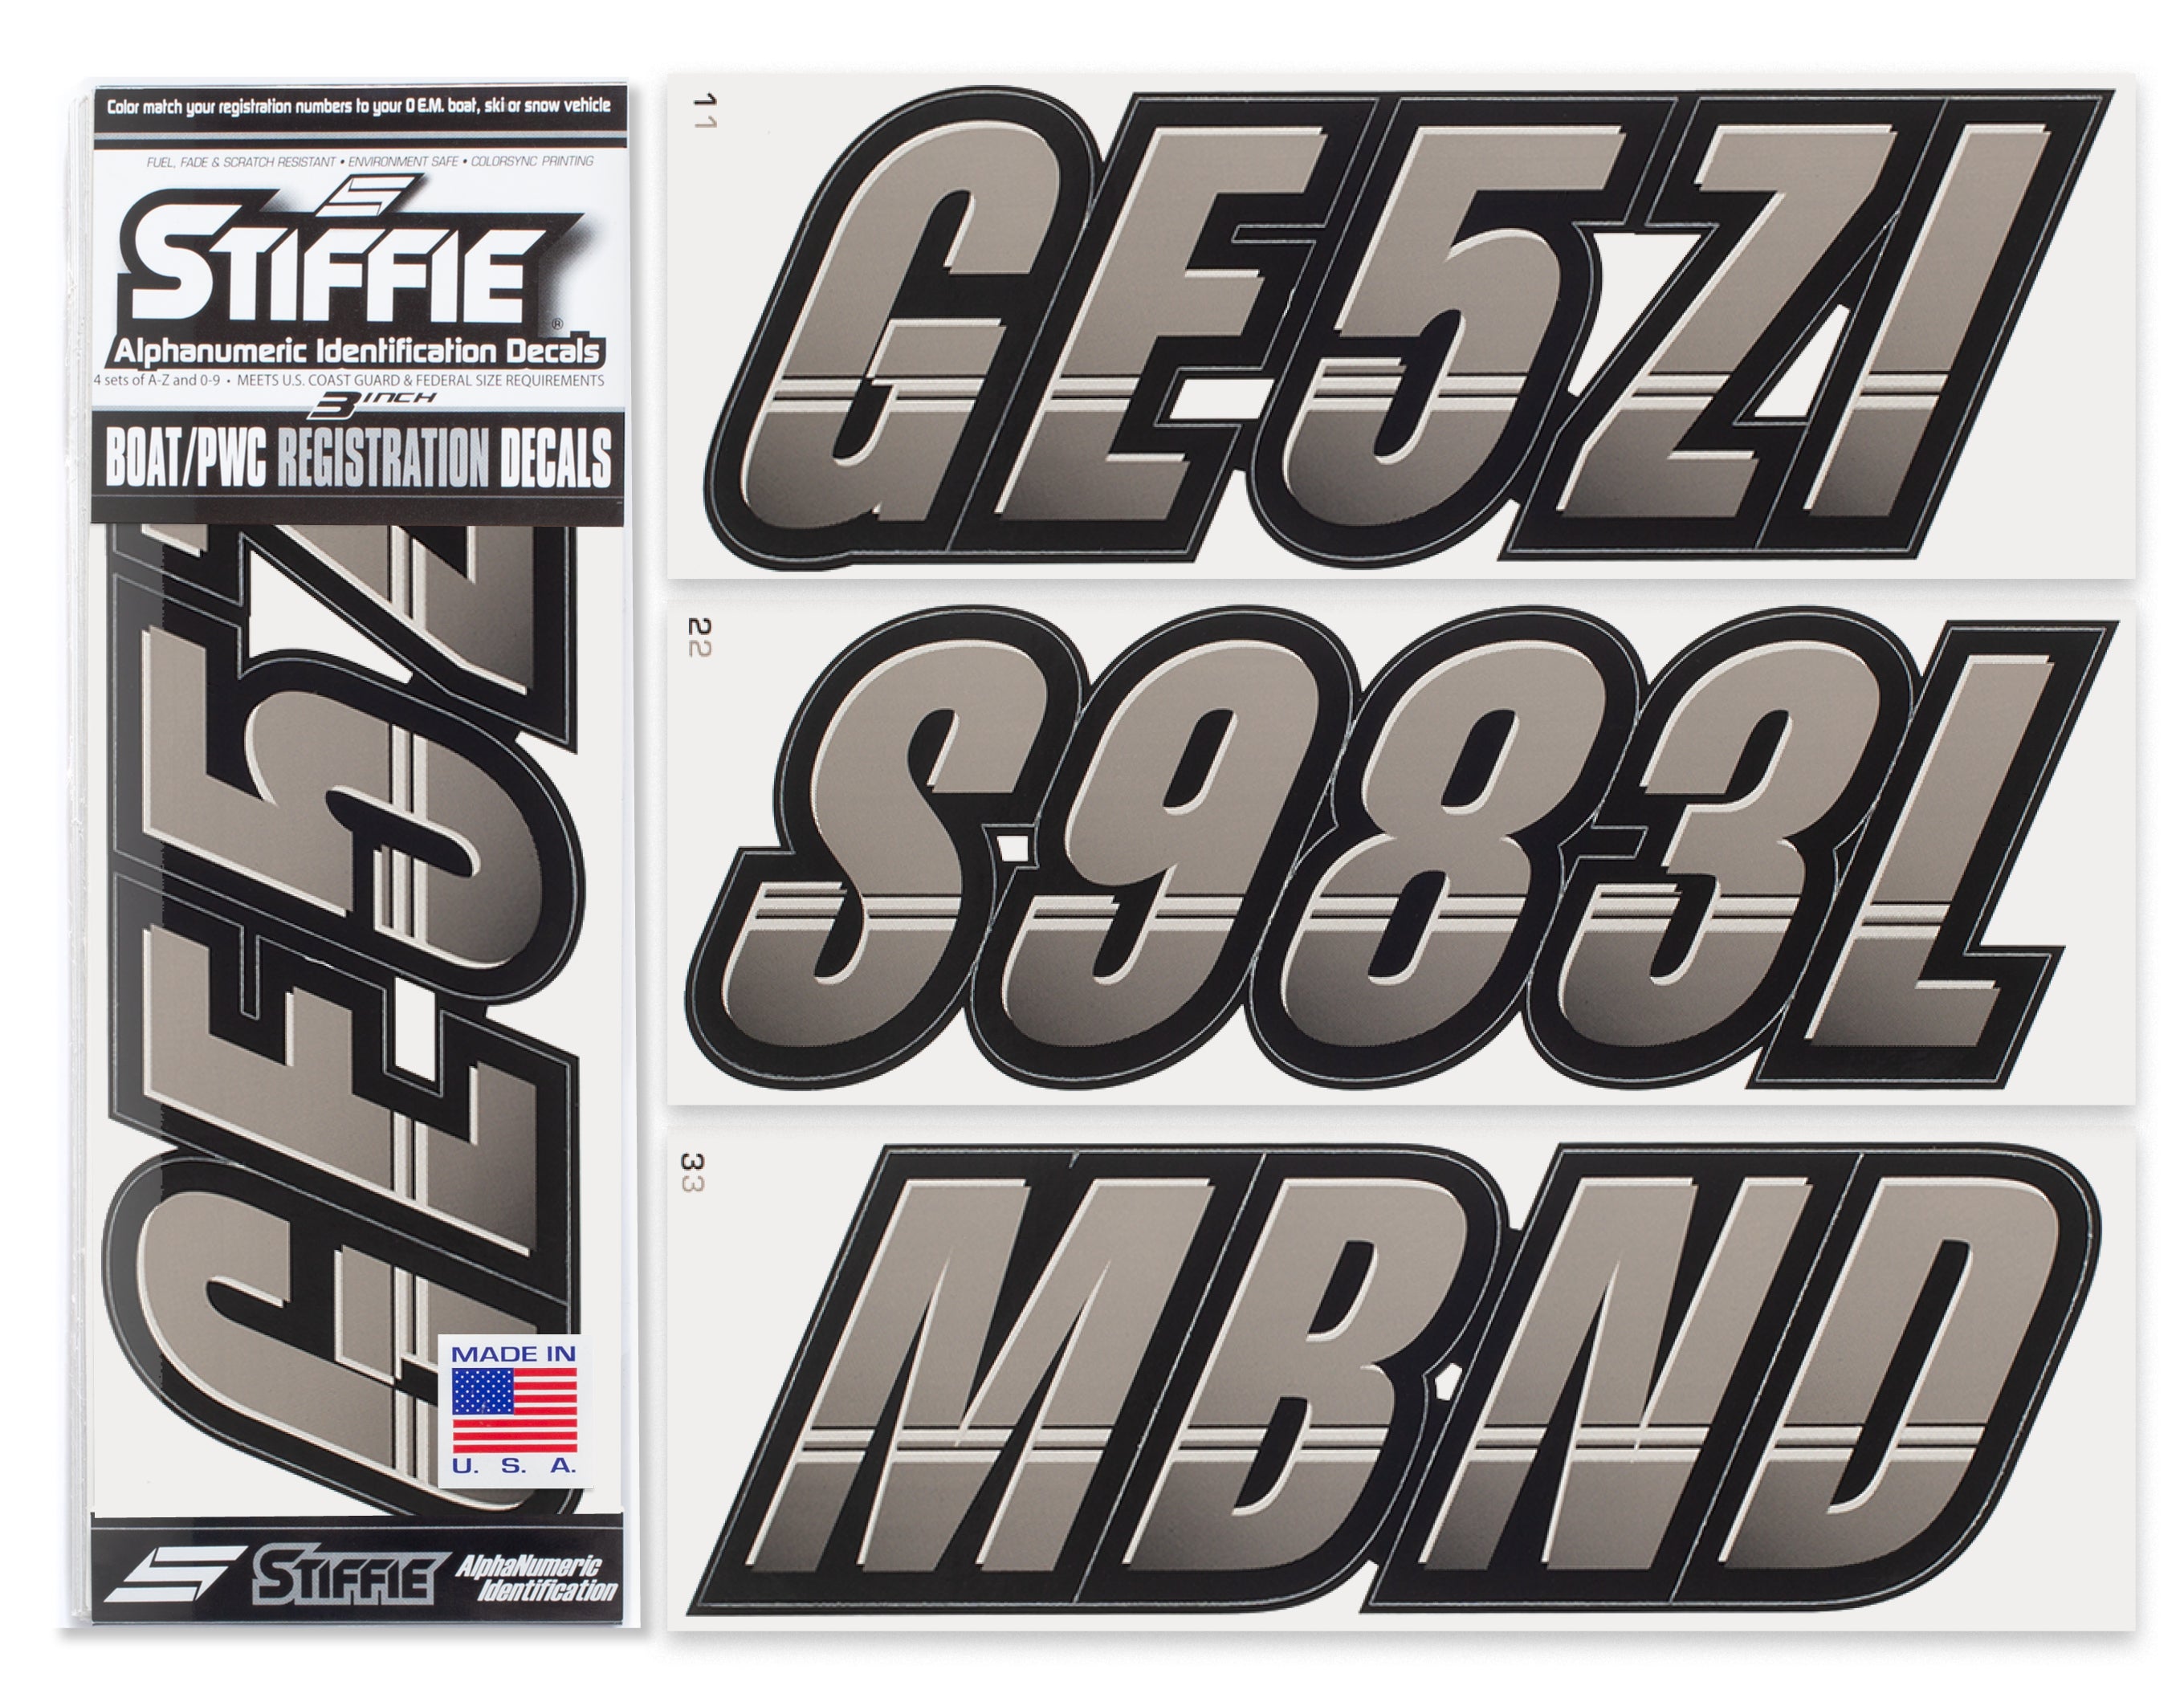 STIFFIE Techtron Charcoal/Black 3" Alpha-Numeric Registration Identification Numbers Stickers Decals for Boats & Personal Watercraft